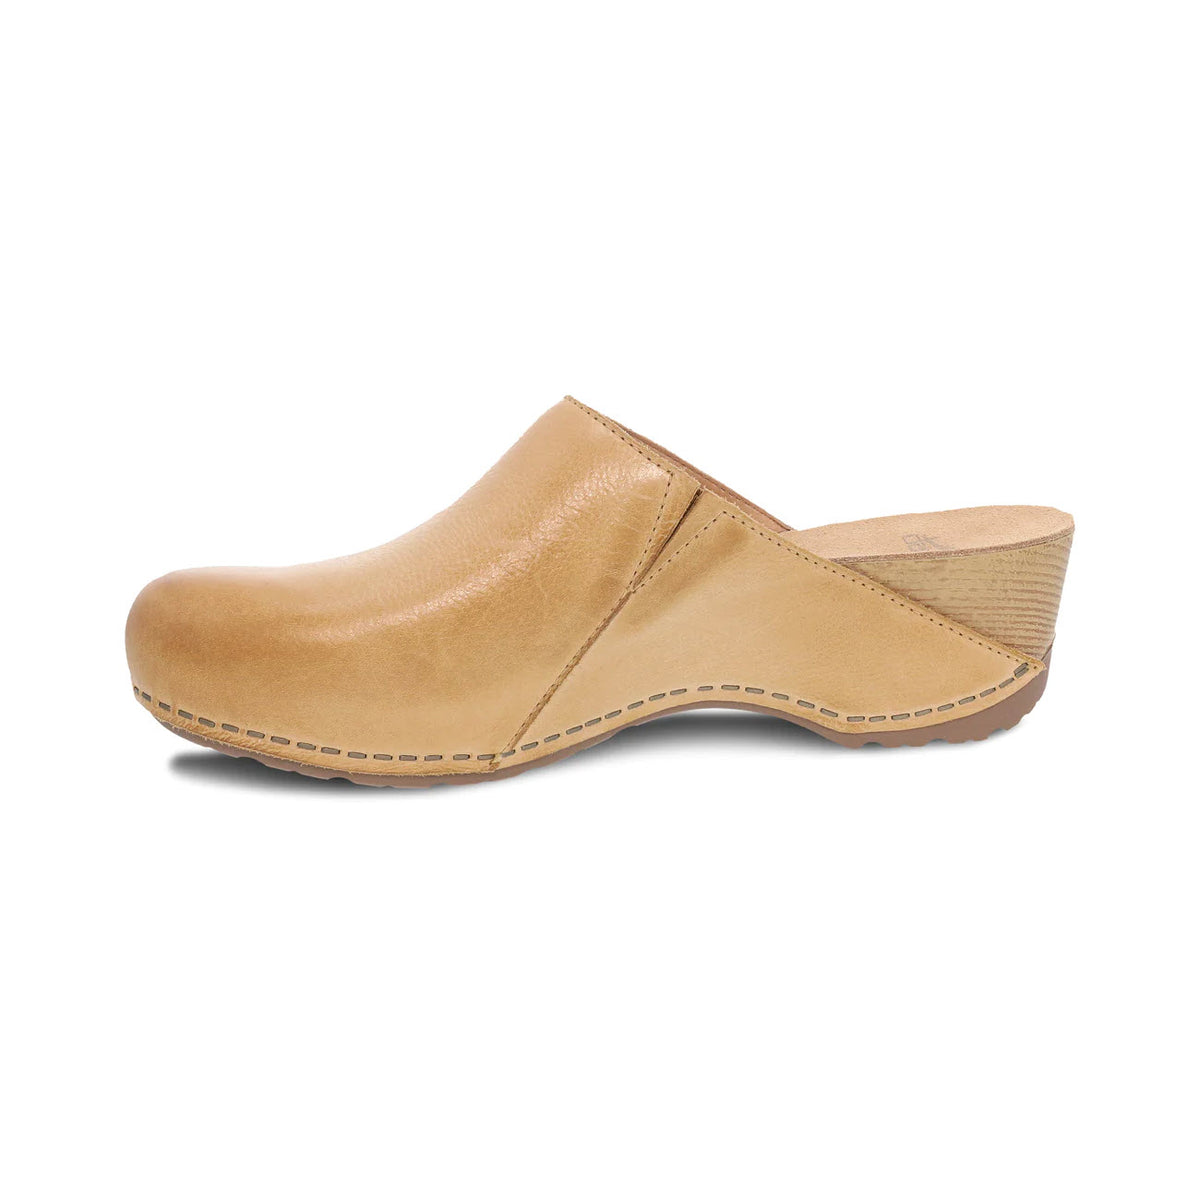 Dansko Talulah Tan mule on a white background, featuring a low heel and stitched details.